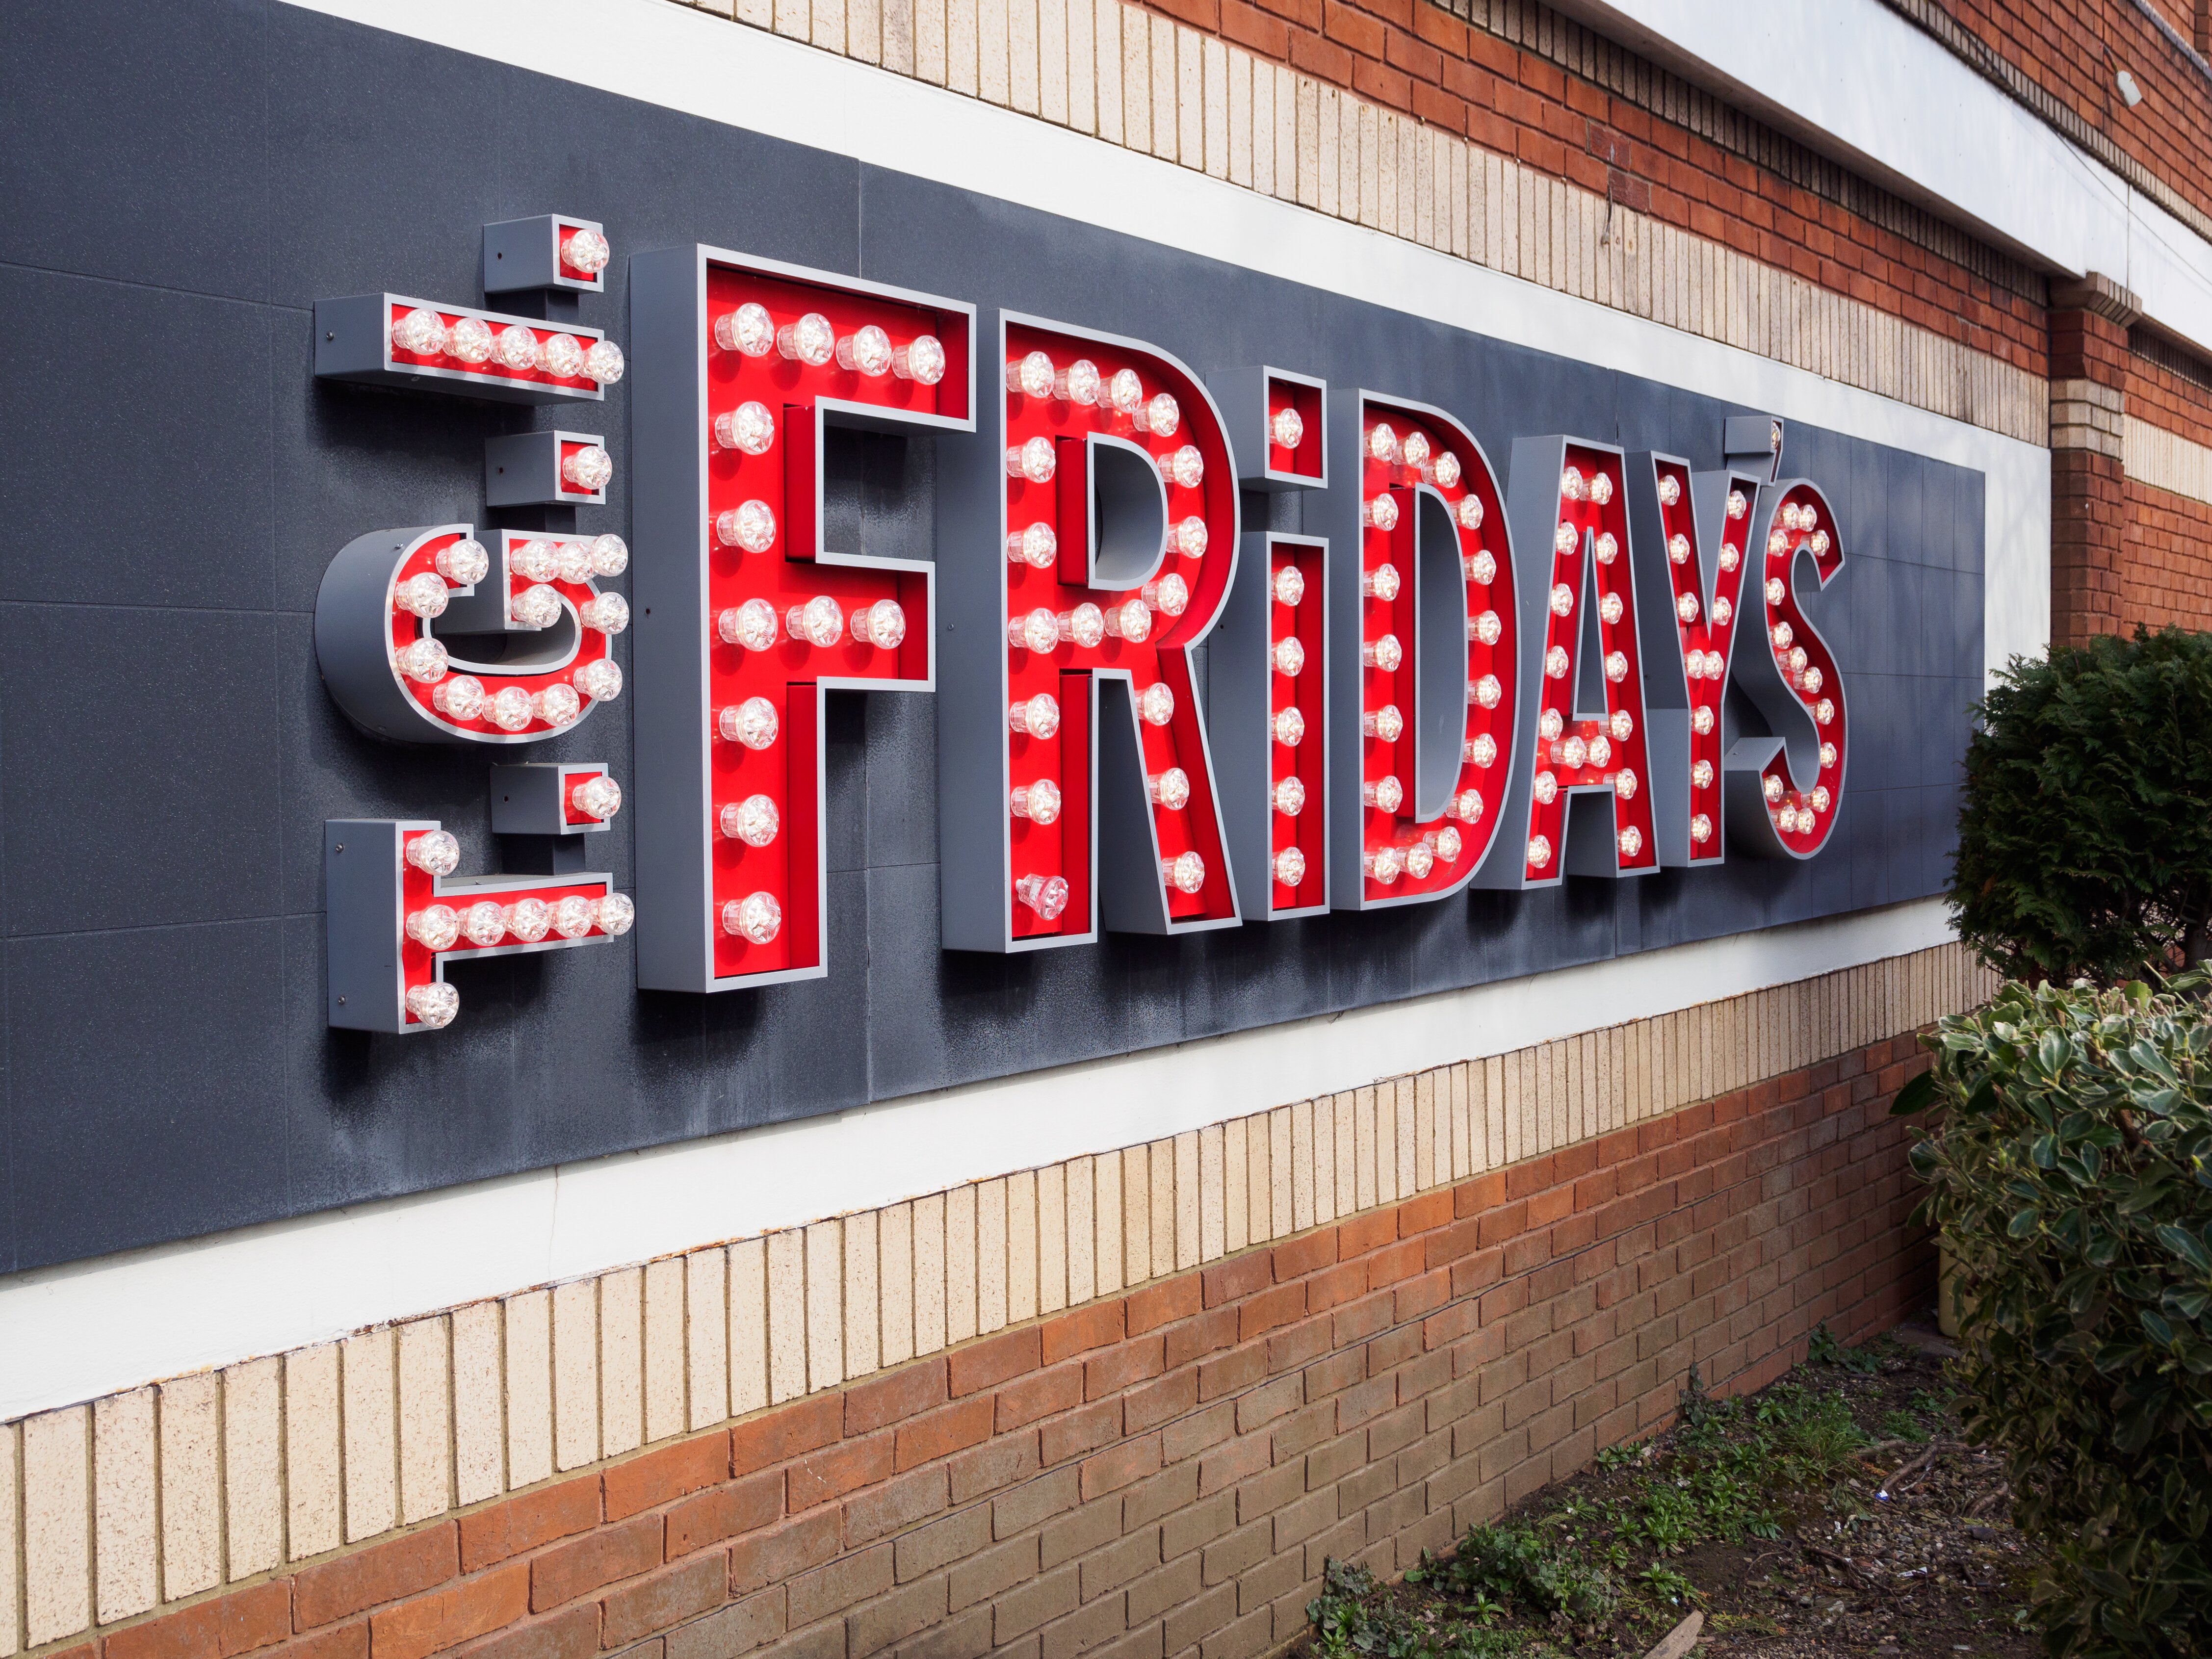 Fridays scraps free meals for staff during longer shifts